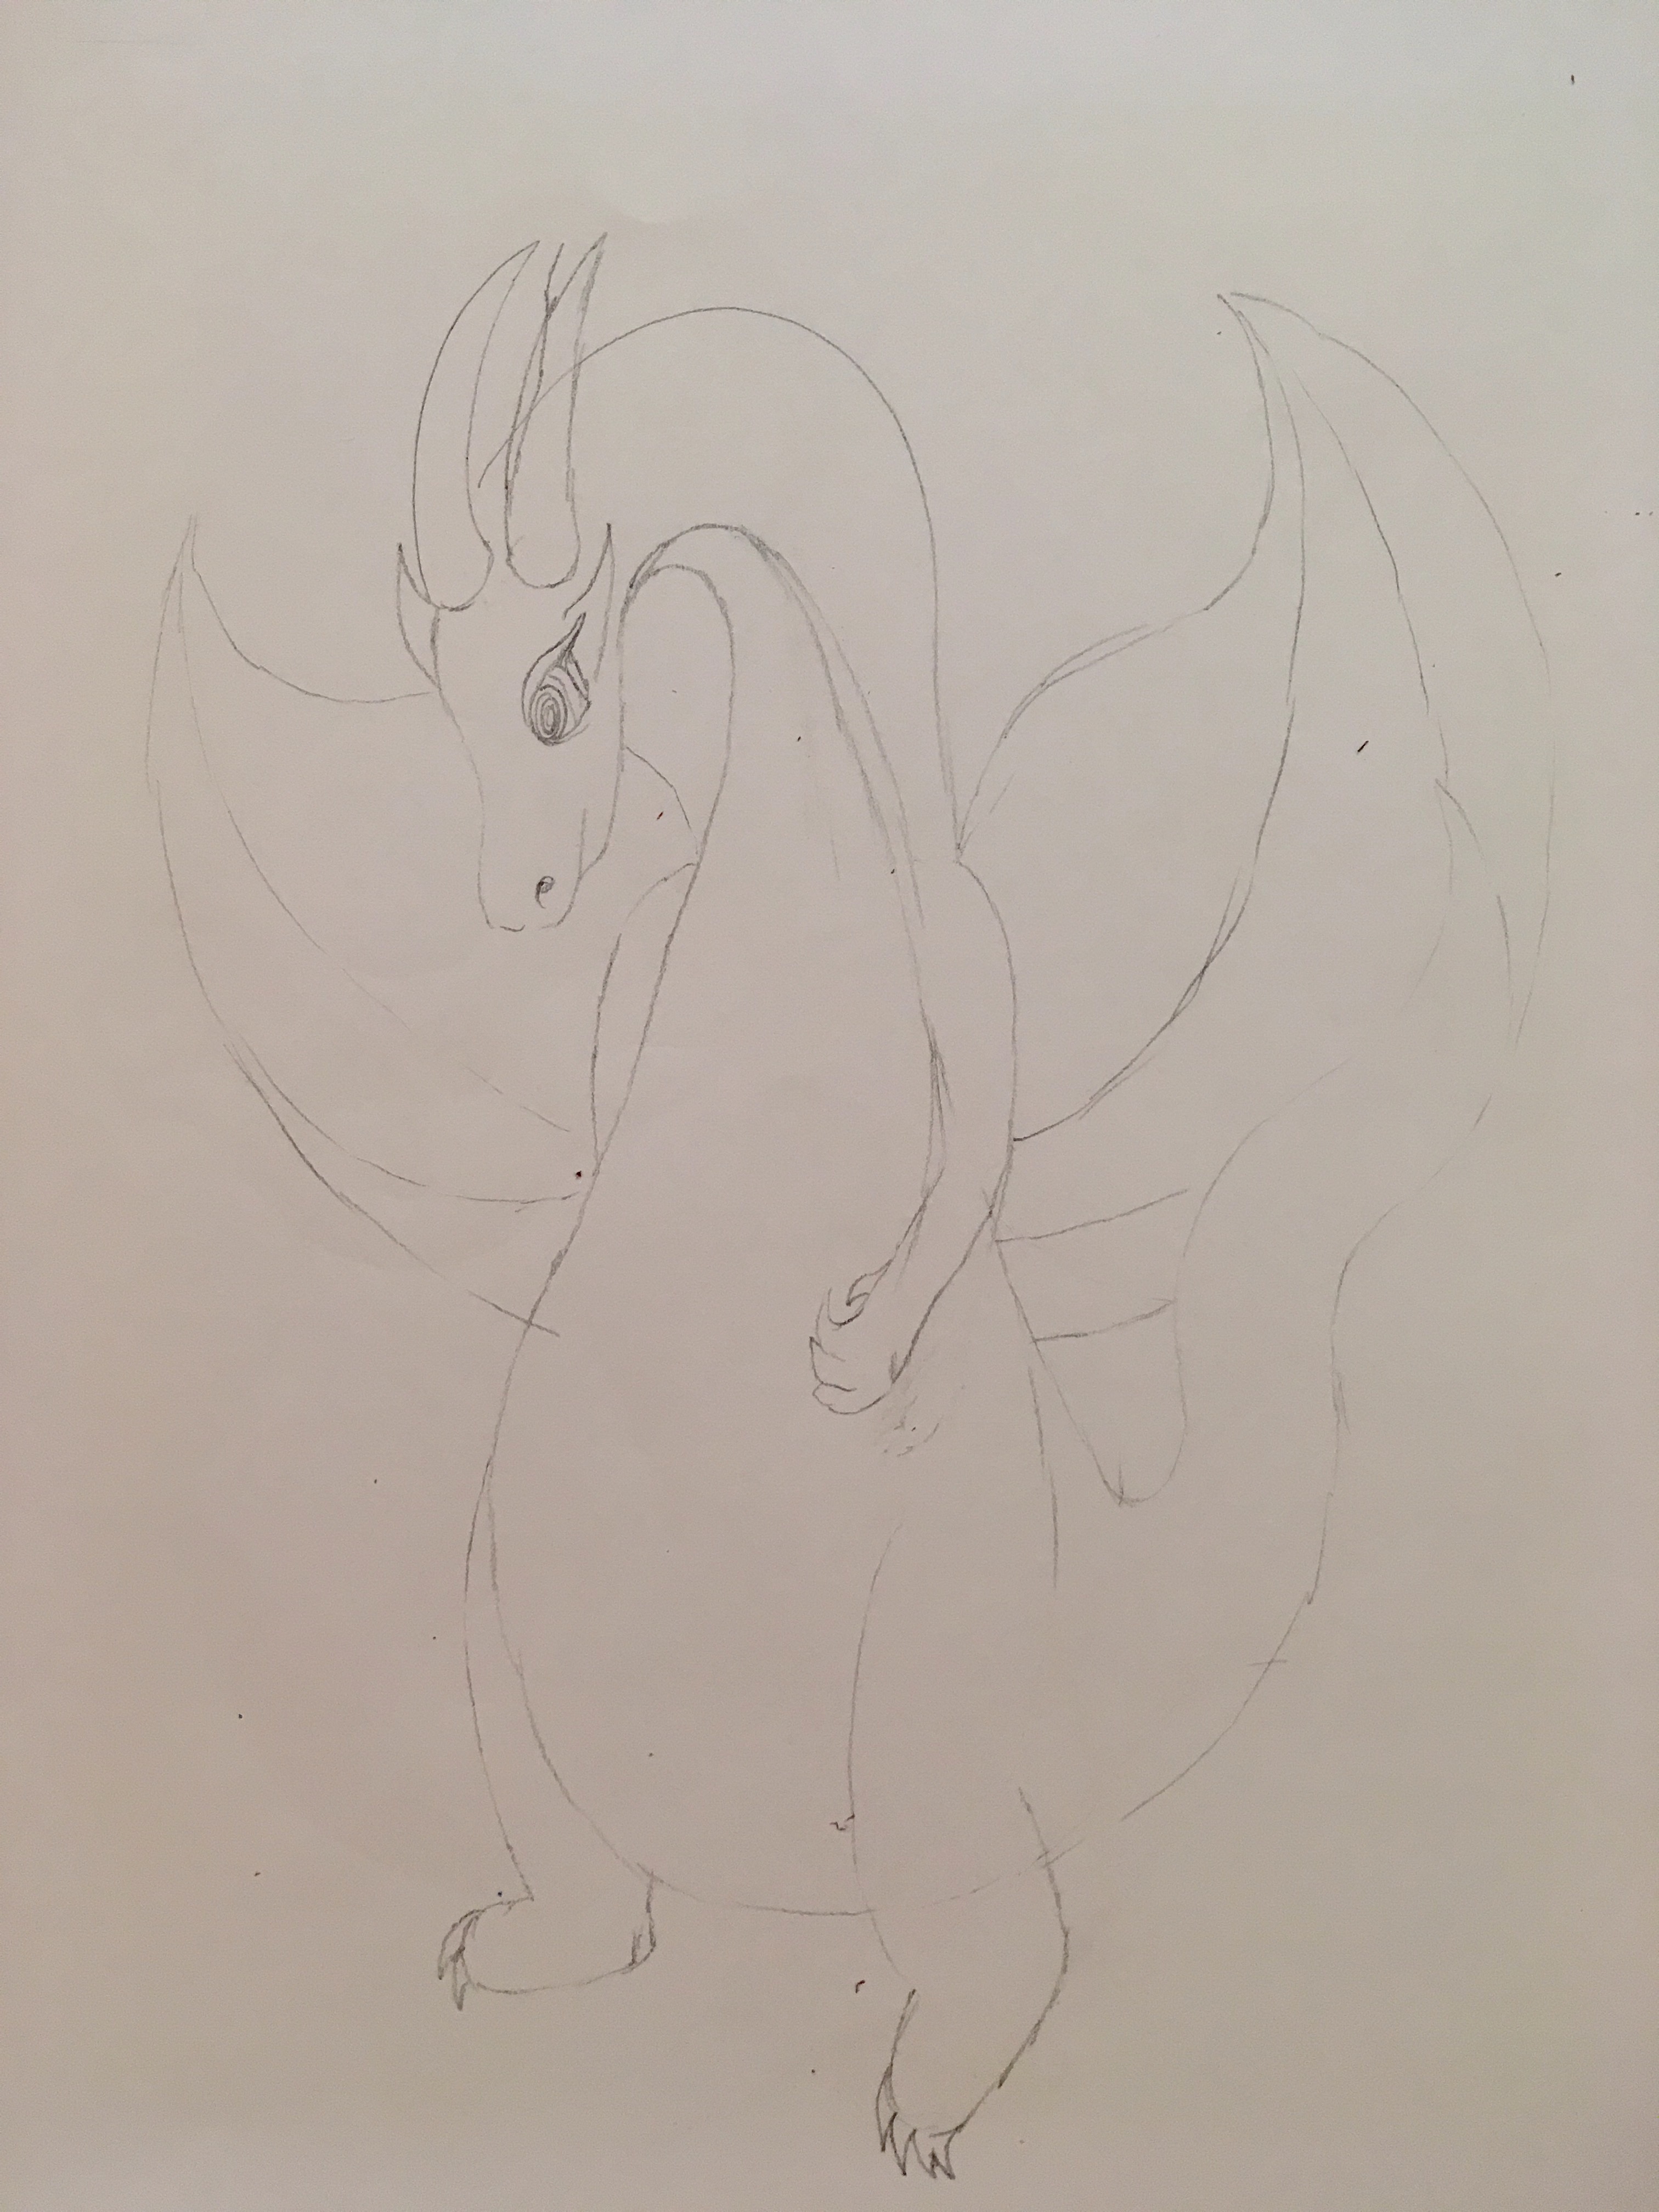 Dragon in pencil with big butterfly wings